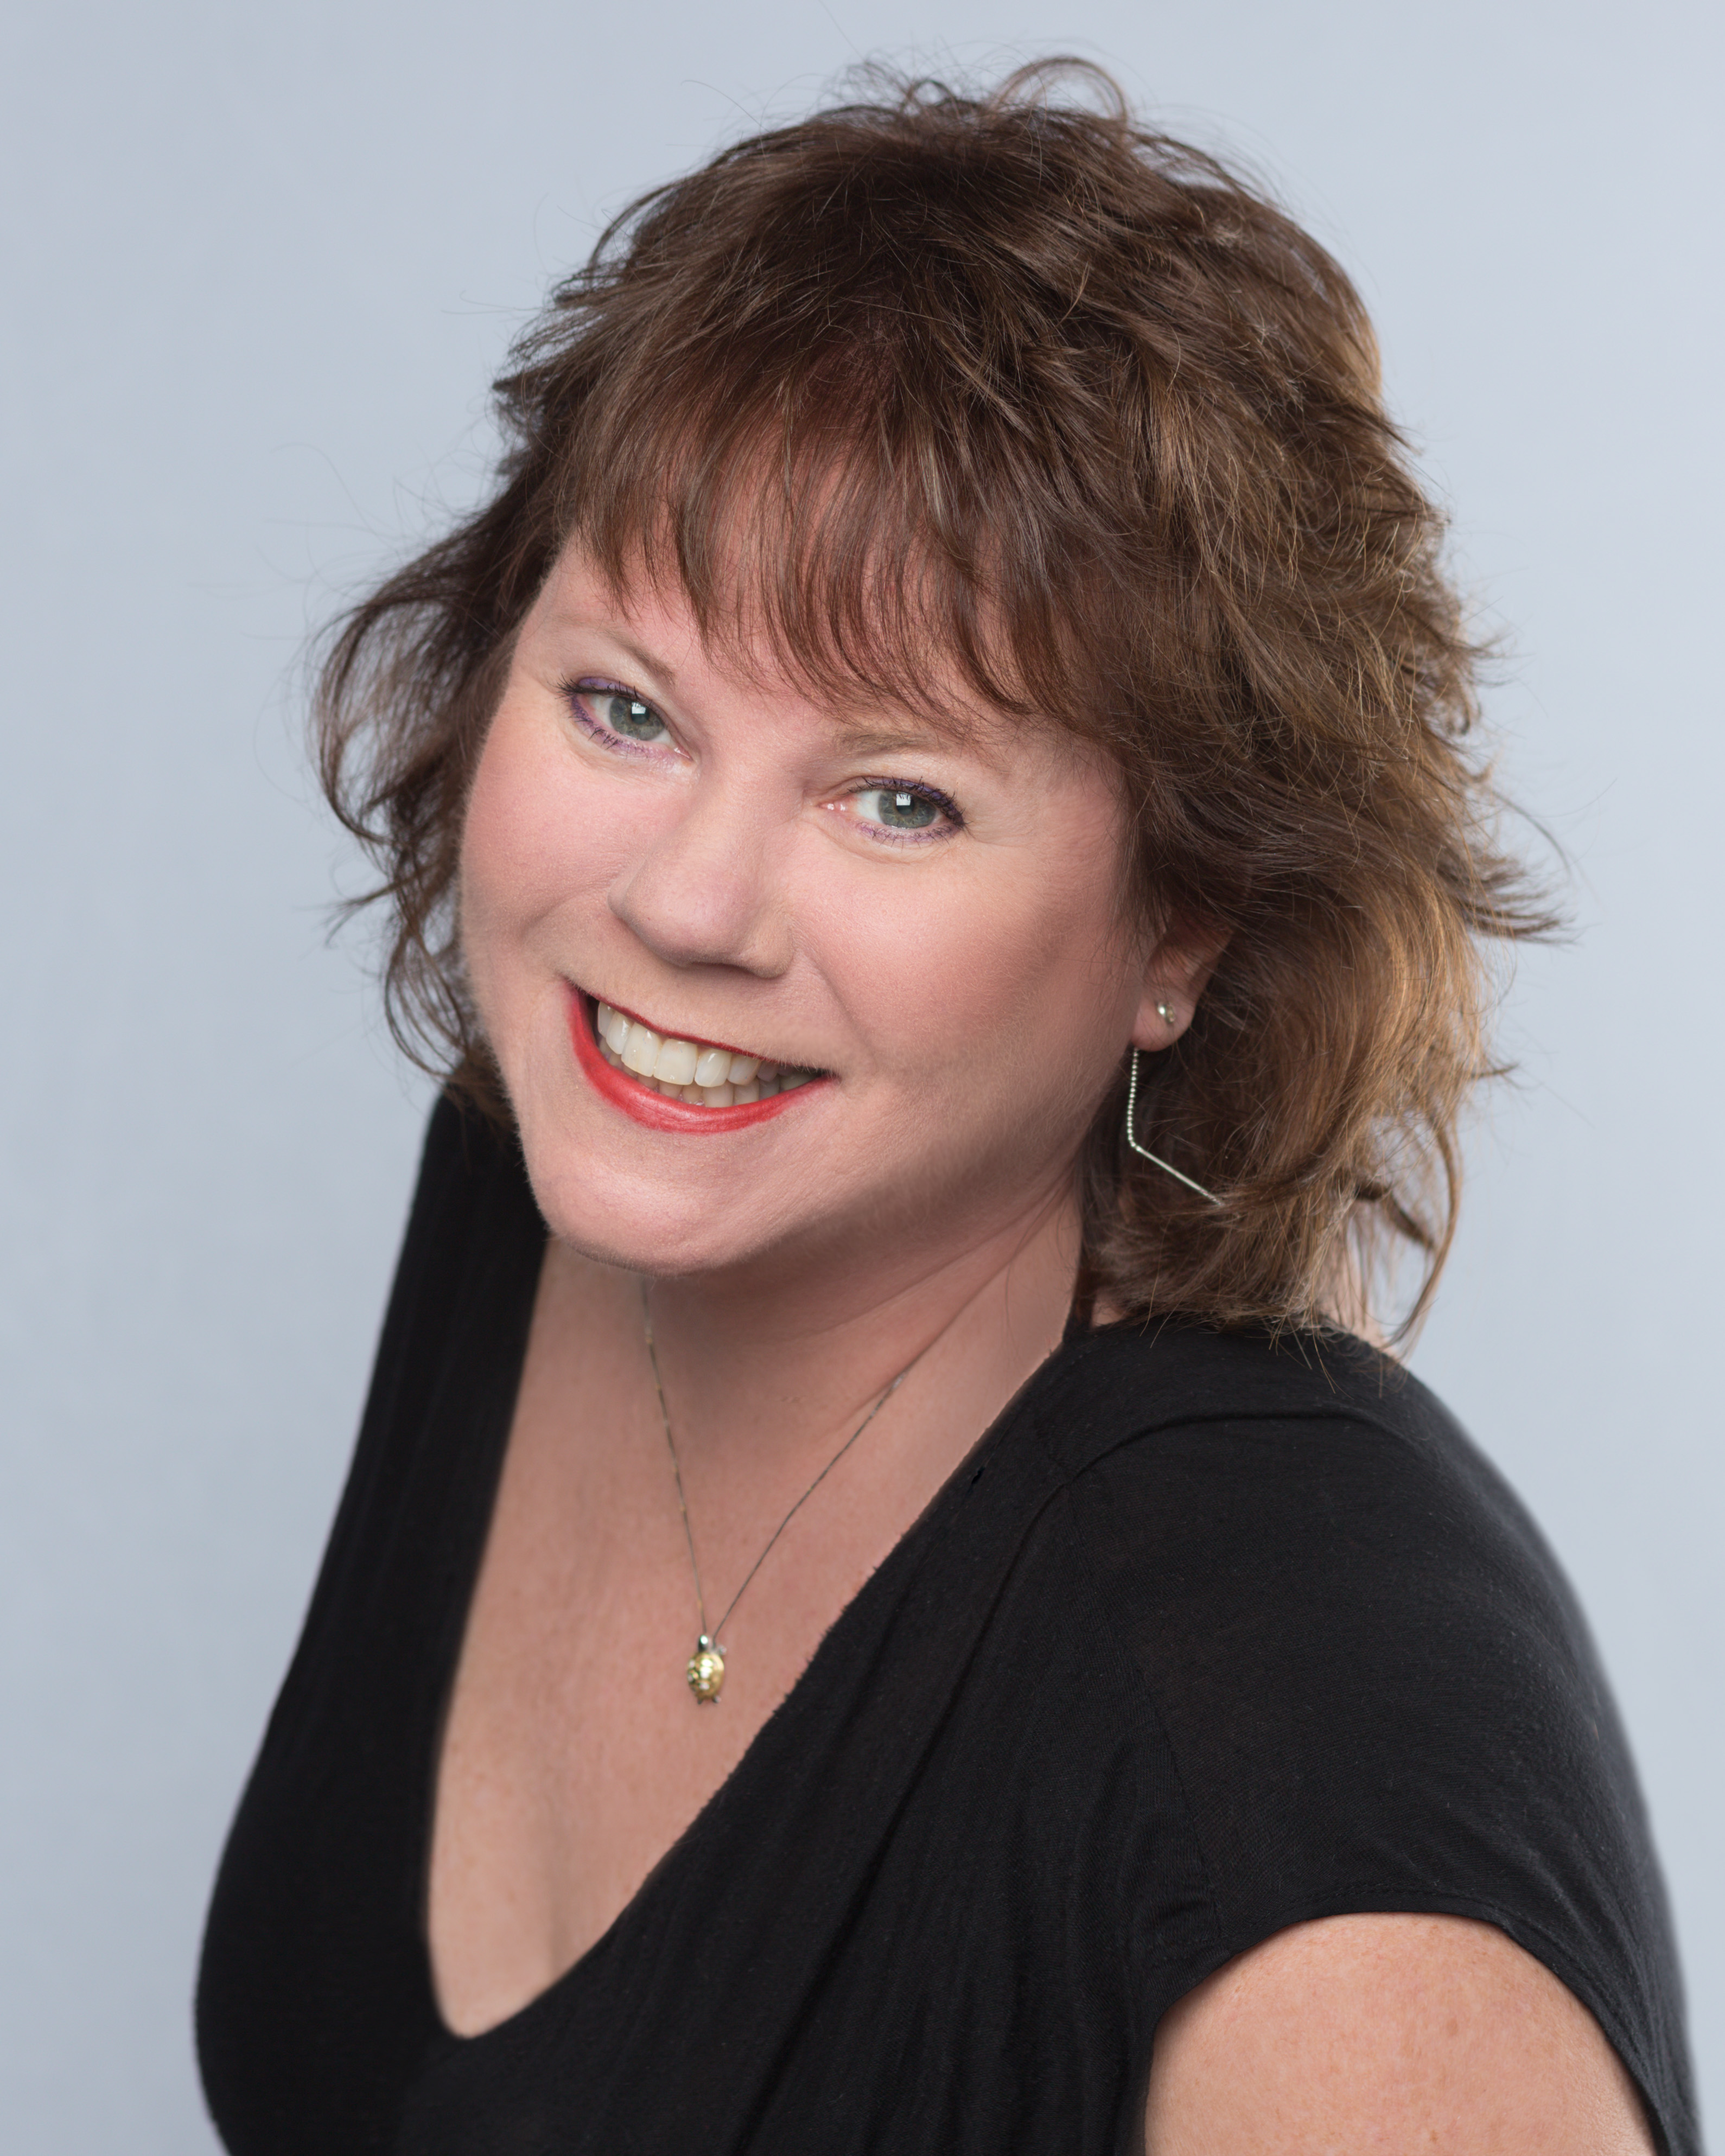 CONRIC PR & Marketing continues to grow with the addition of journalism veteran Kathy Grey